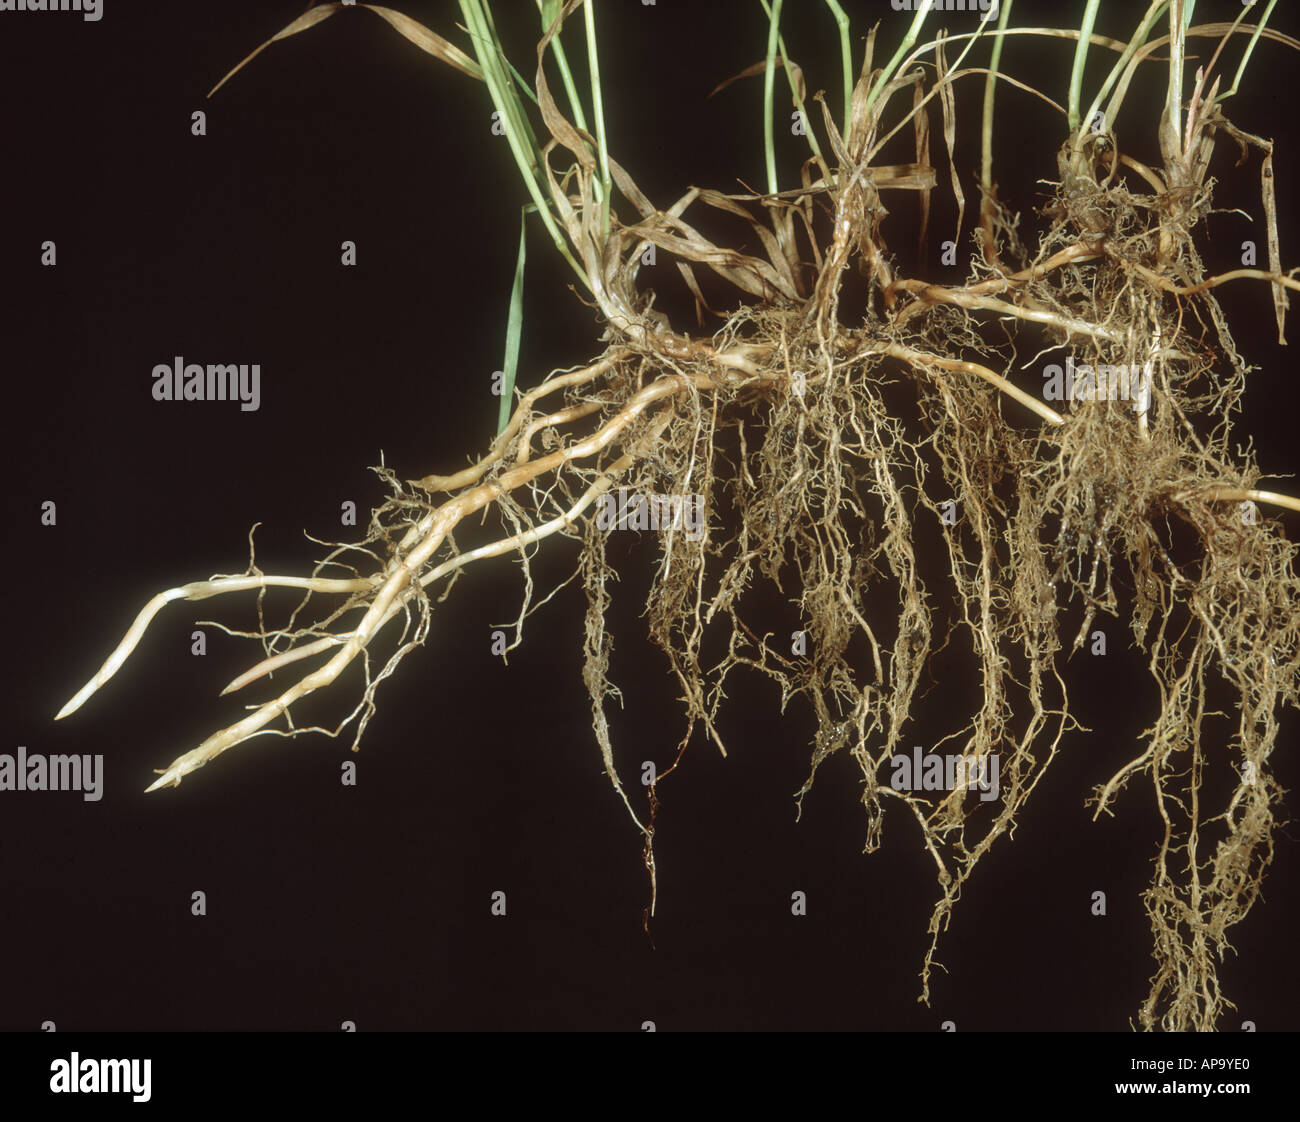 Couch or twitch grass Agropyron repens showing complex underground root system of rhizomes Stock Photo